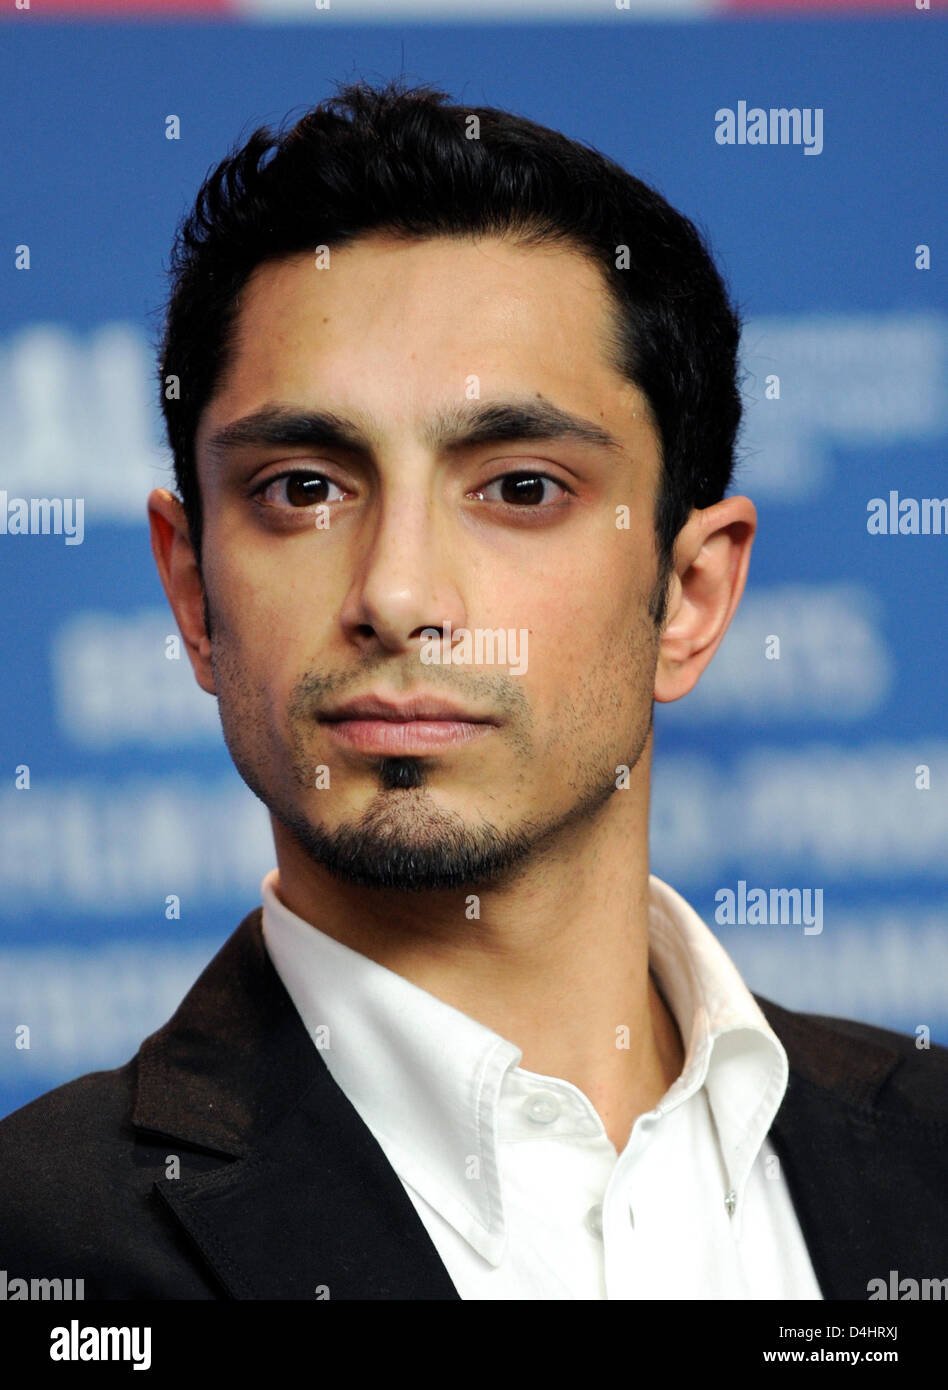 Actor Riz Ahmed (UK) attends a press conference on the film ?Rage? at the 59th Berlin International Film Festival in Berlin, Germany, 08 February 2009. ?Rage? is among the 18 films competing for Silver and Golden Bear awards at the 59th Berlinale. Photo: Rainer Jensen Stock Photo